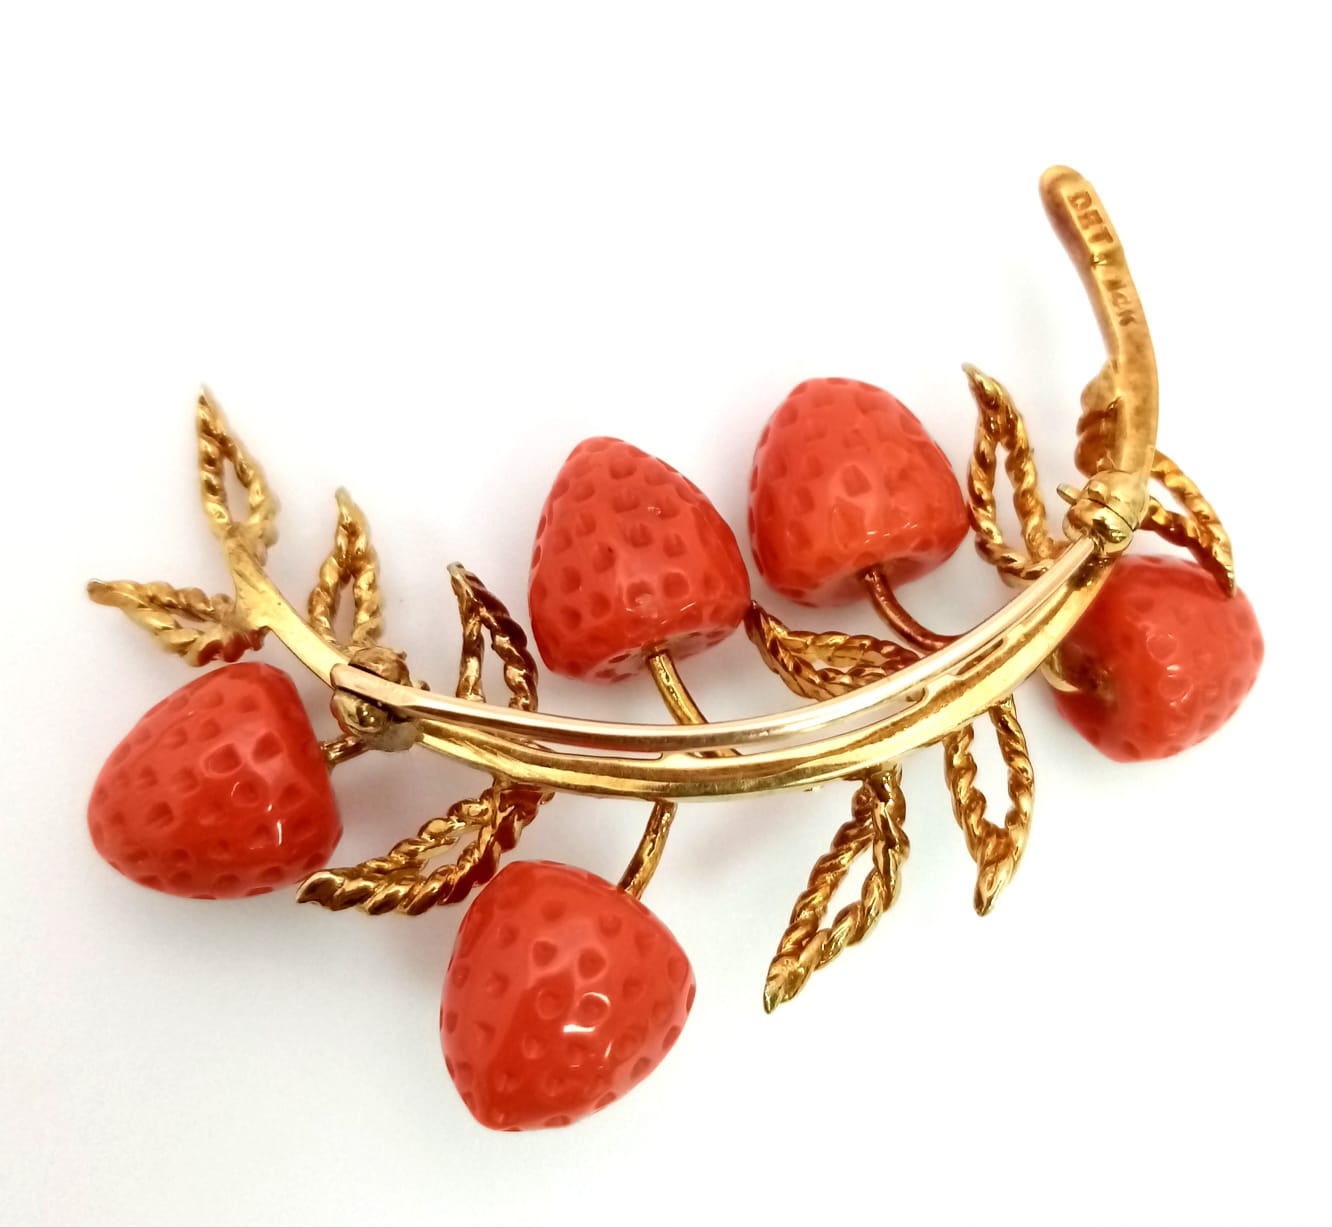 A vintage, 14 K yellow gold brooch with red coral strawberries. Length: 50 mm, weight: 15 g. 14249 - Image 2 of 4